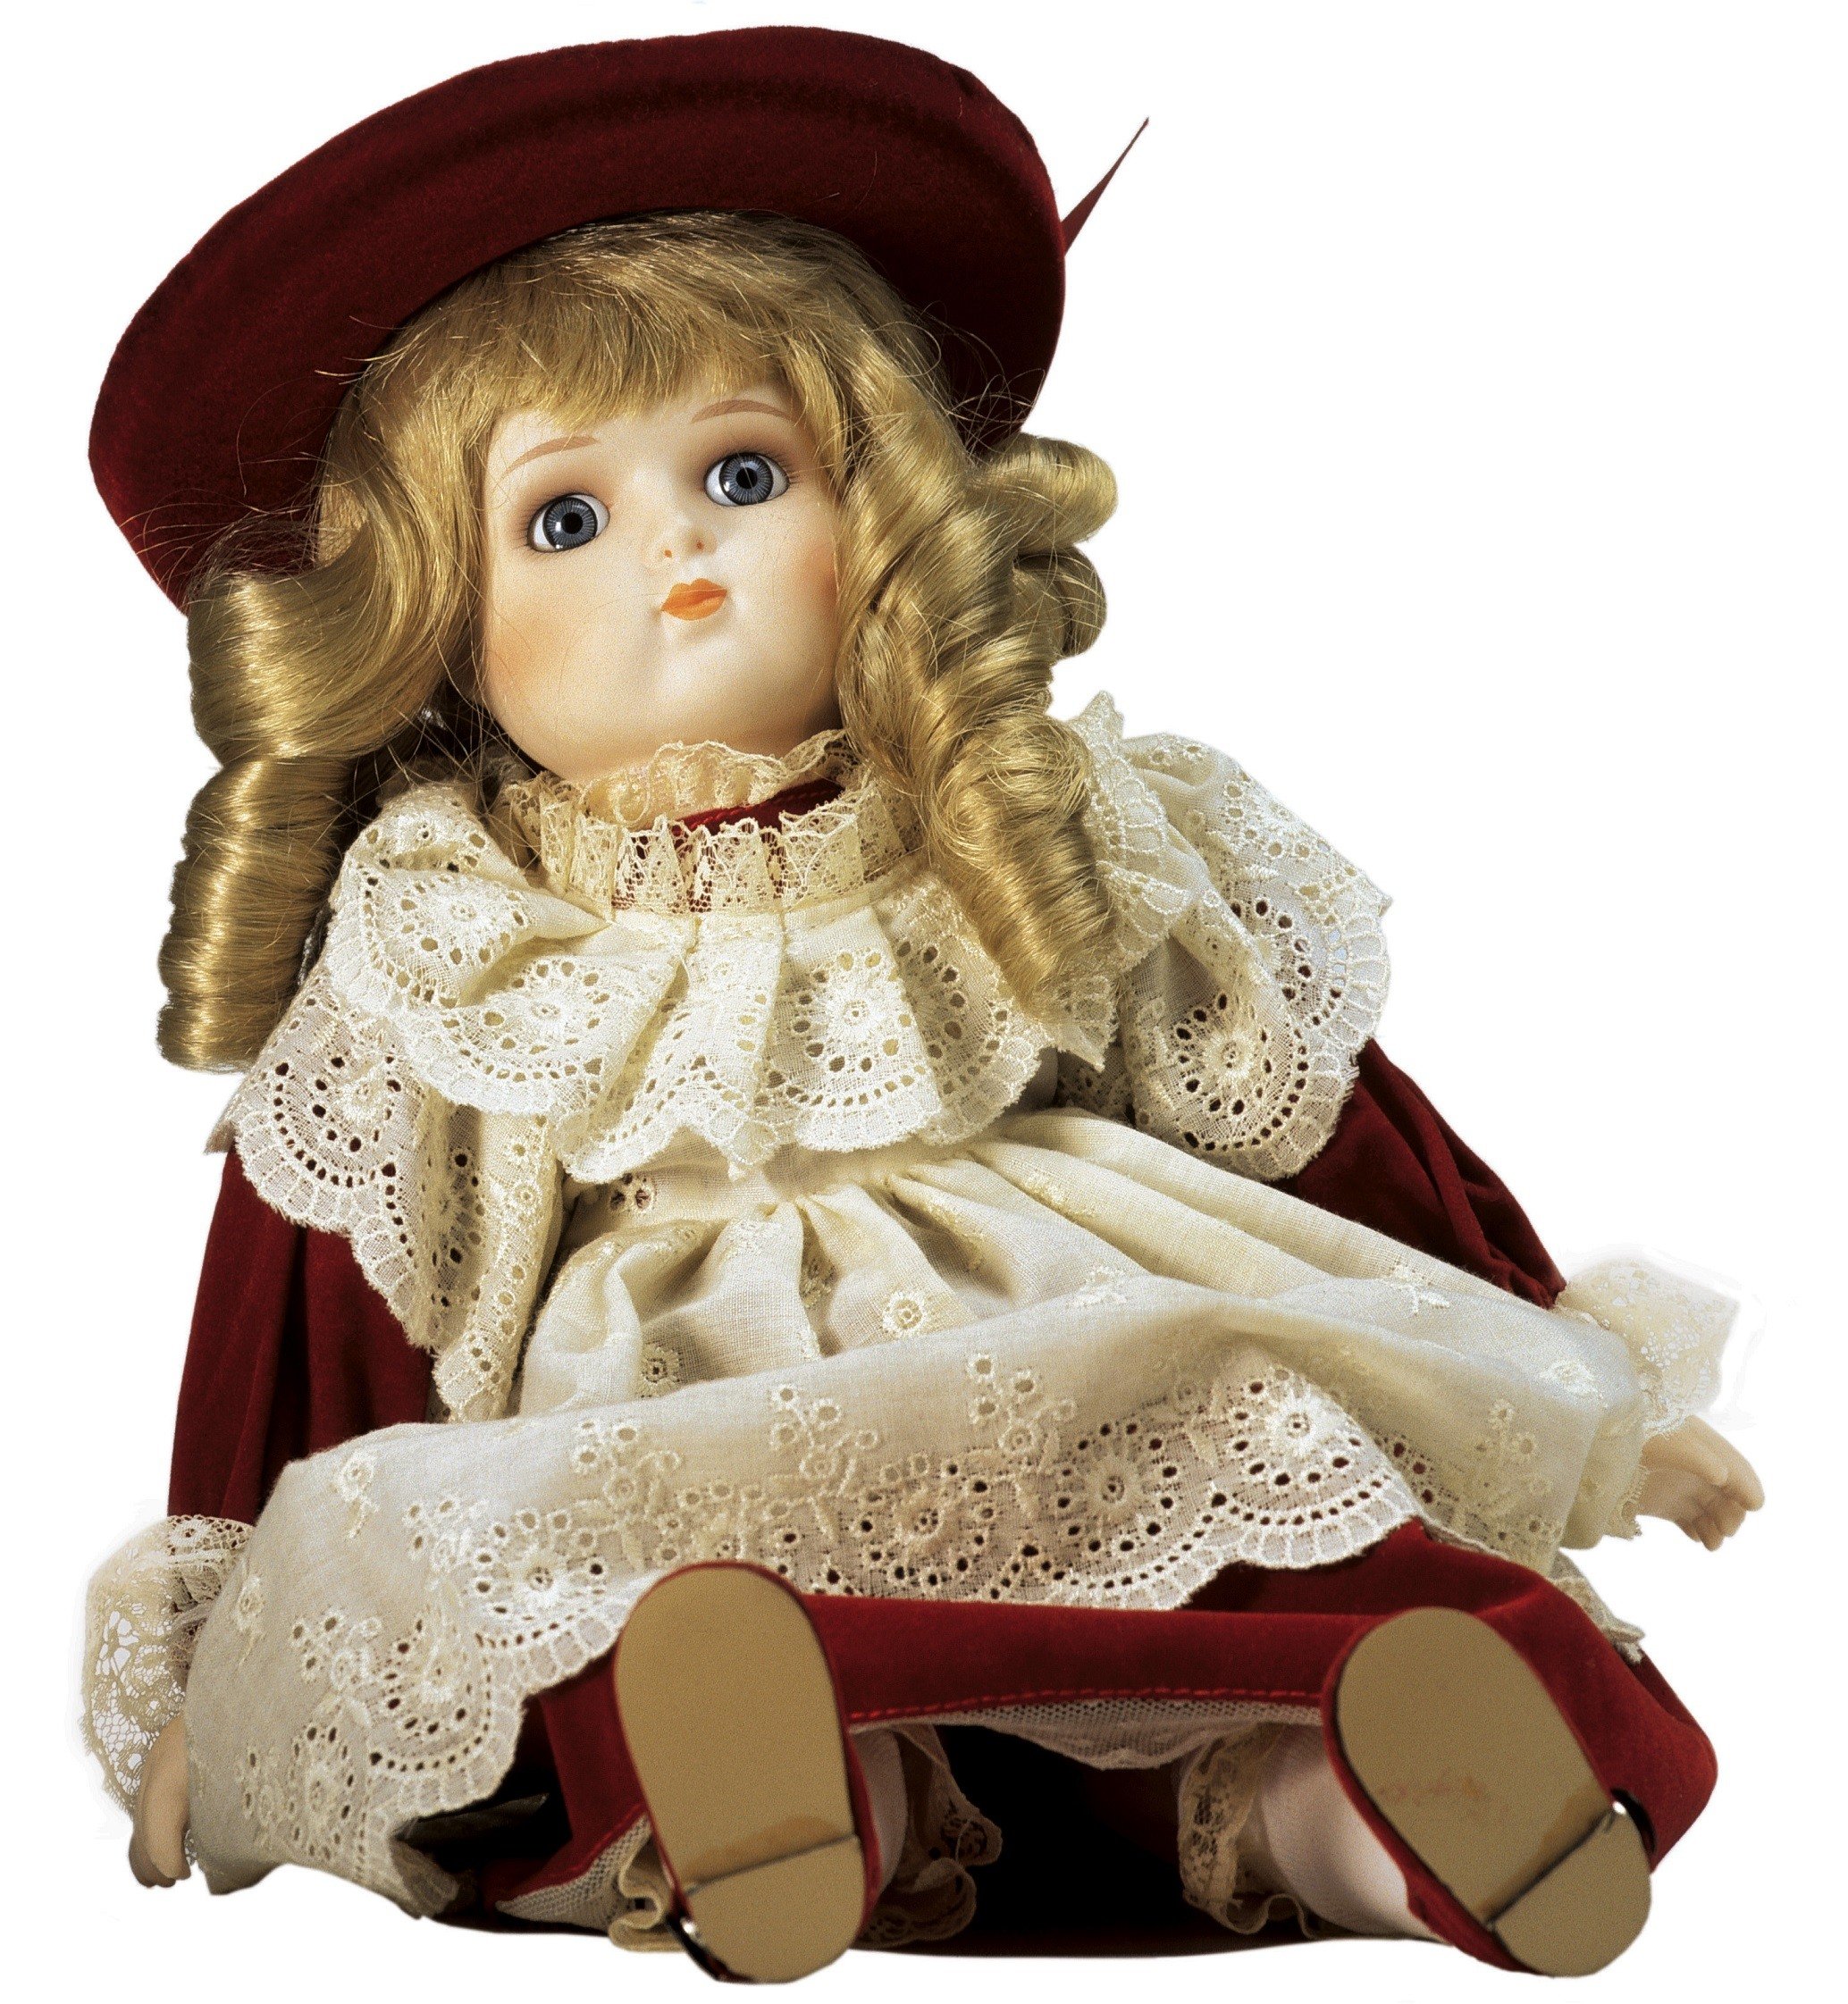 Porcelaine doll in red dress